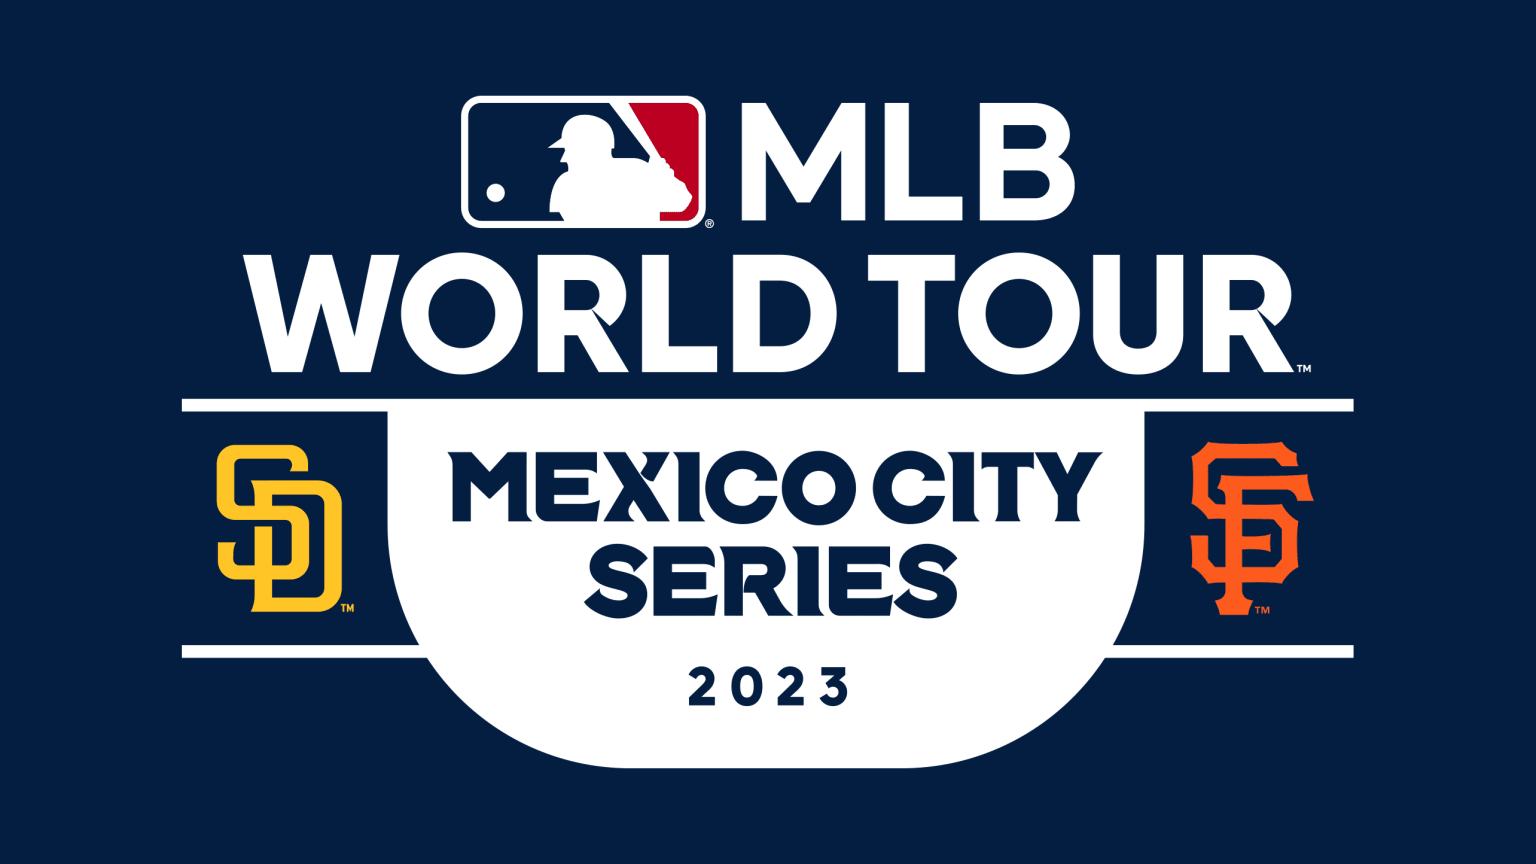 Mexico City Series 2023 features Giants, Padres